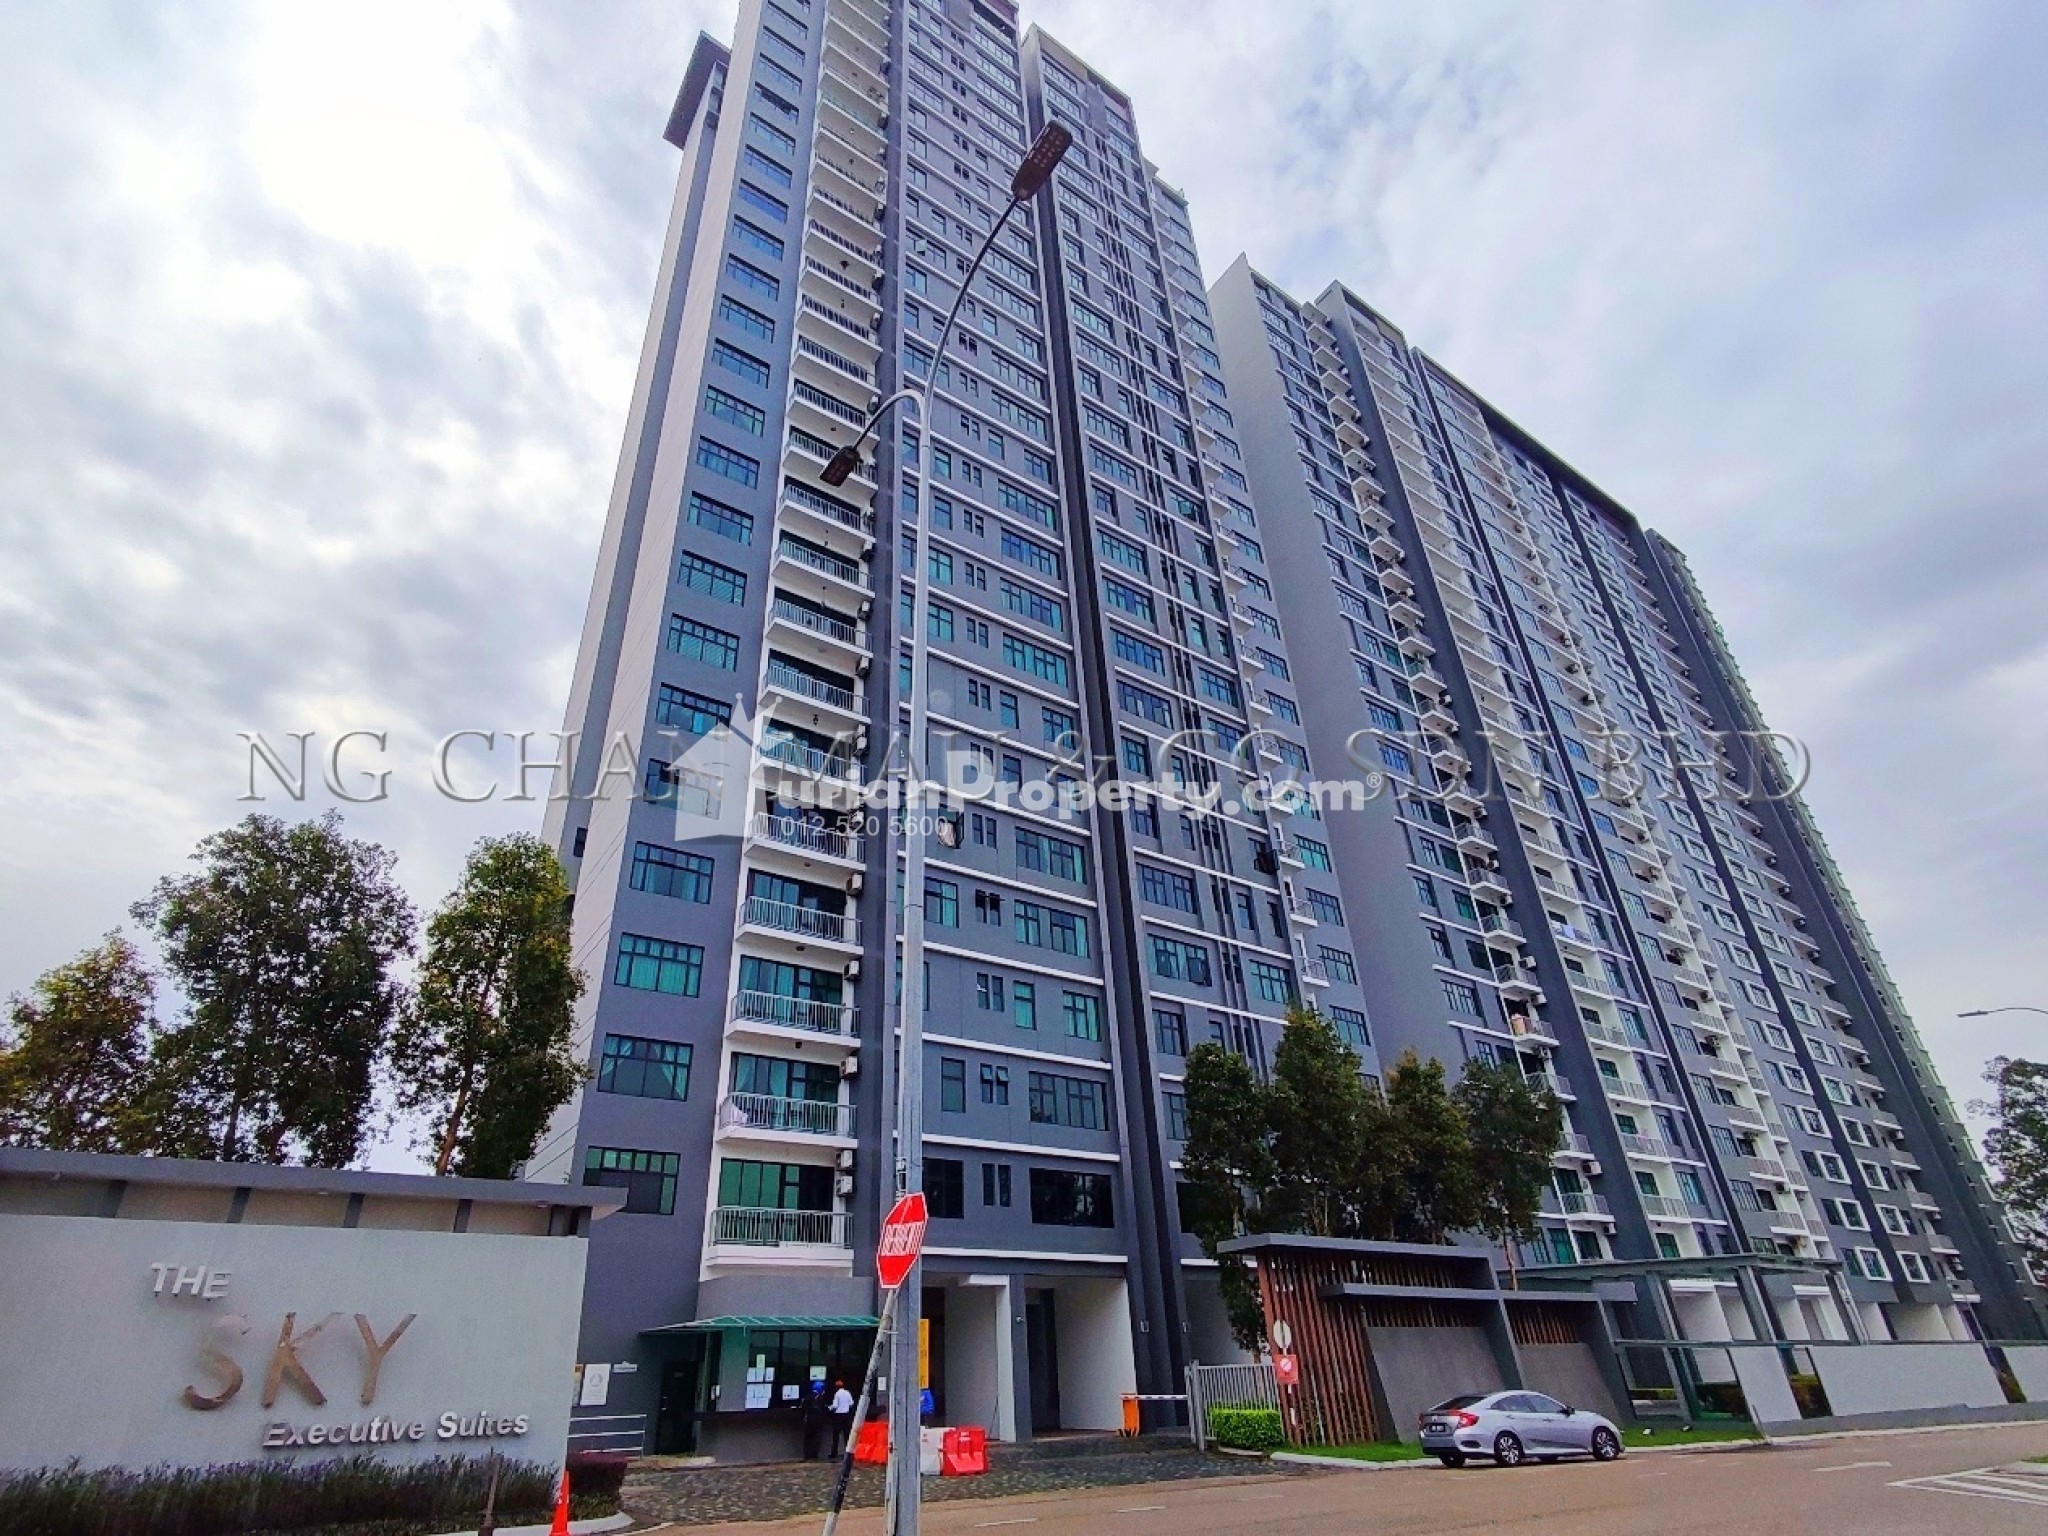 Serviced Residence For Auction at The Sky Executive Suites